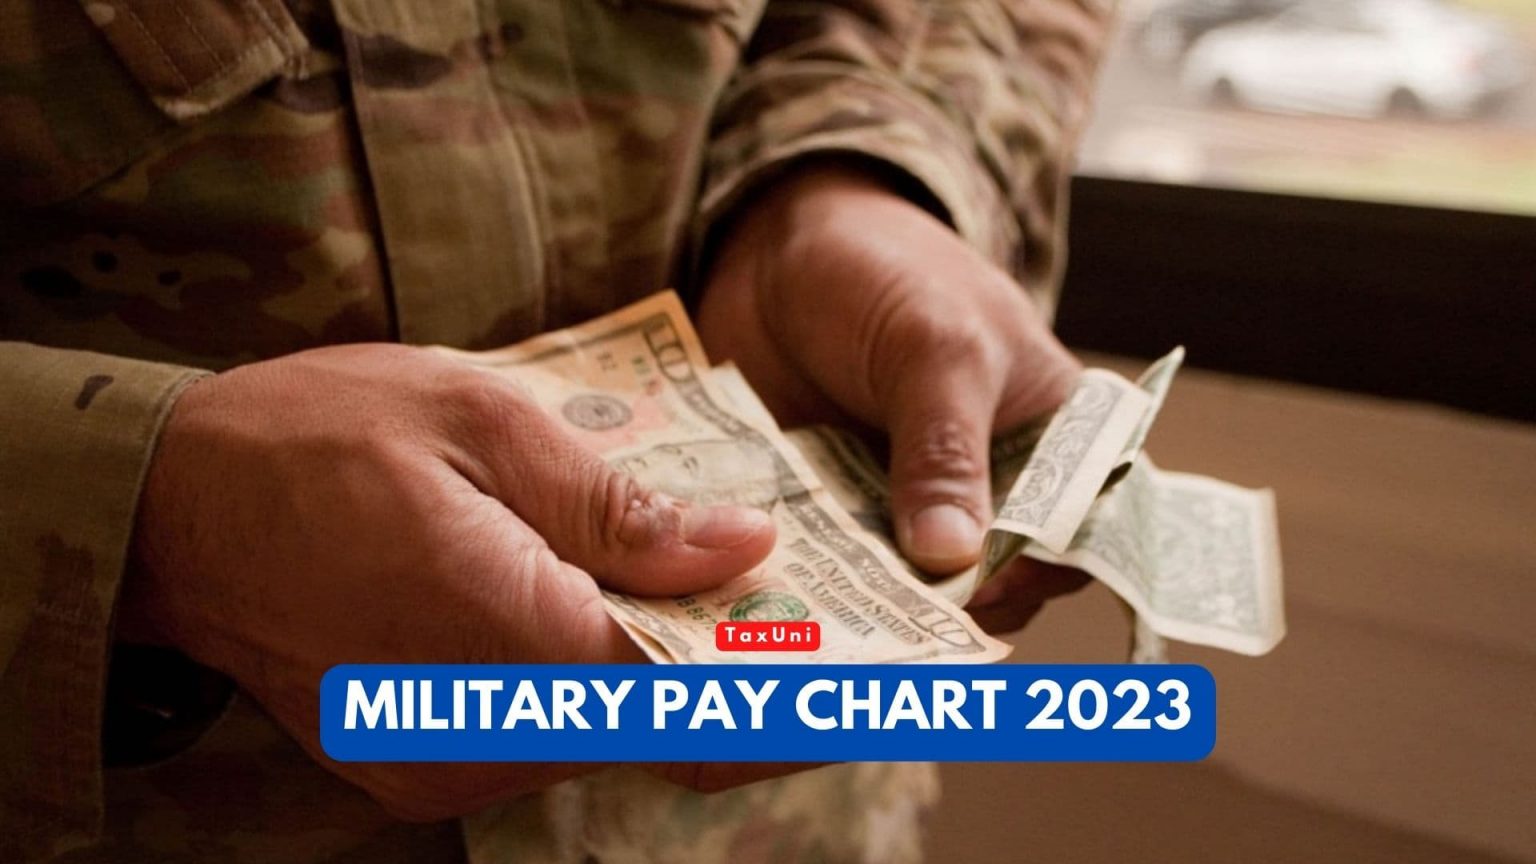 Military Pay Chart 2023 TaxUni Cover 1 1536x864 